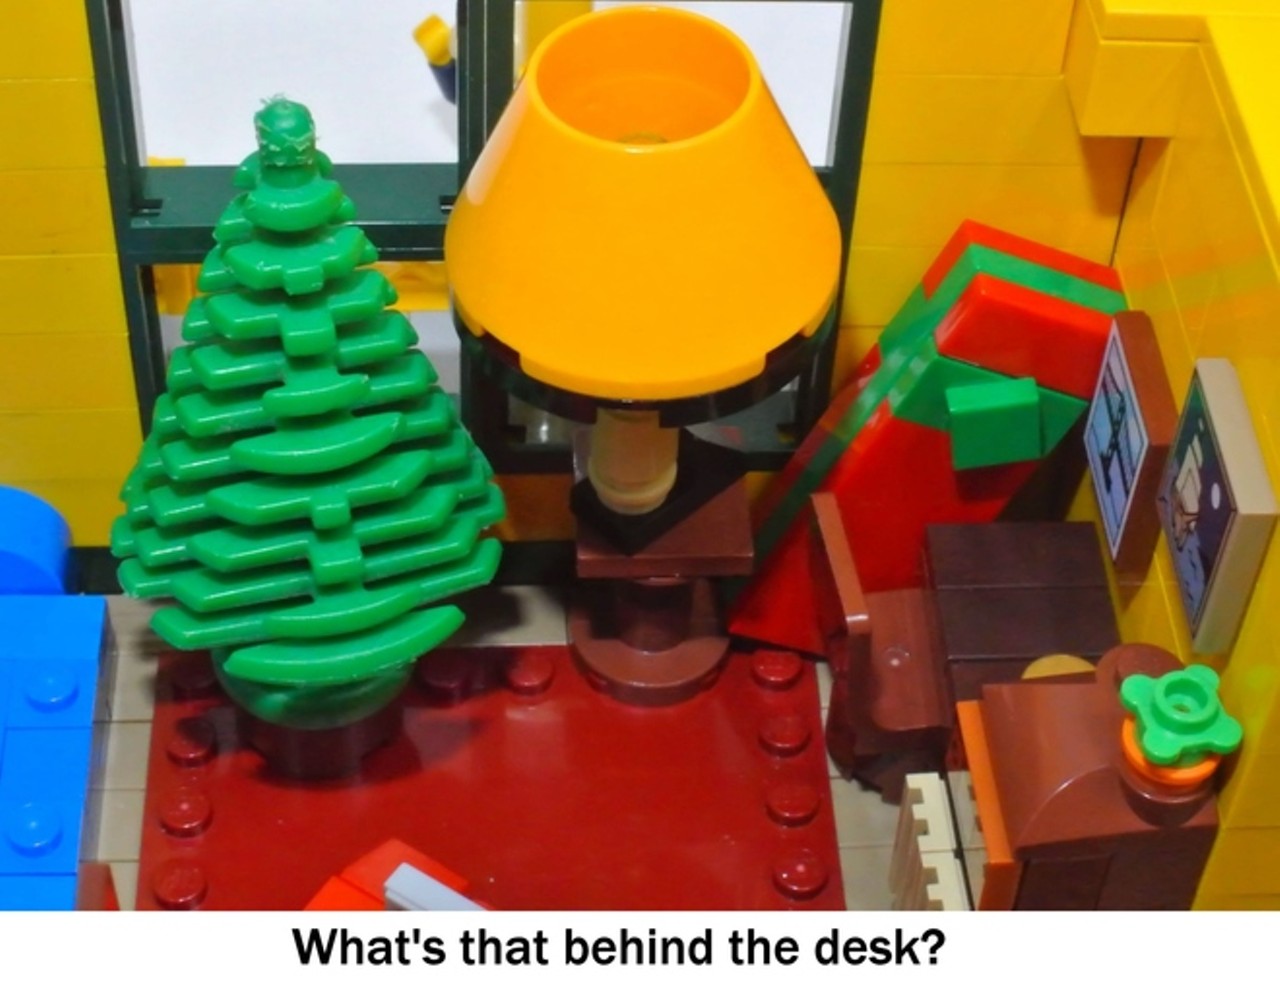 27 photos of the LEGO replica of the Christmas Story house